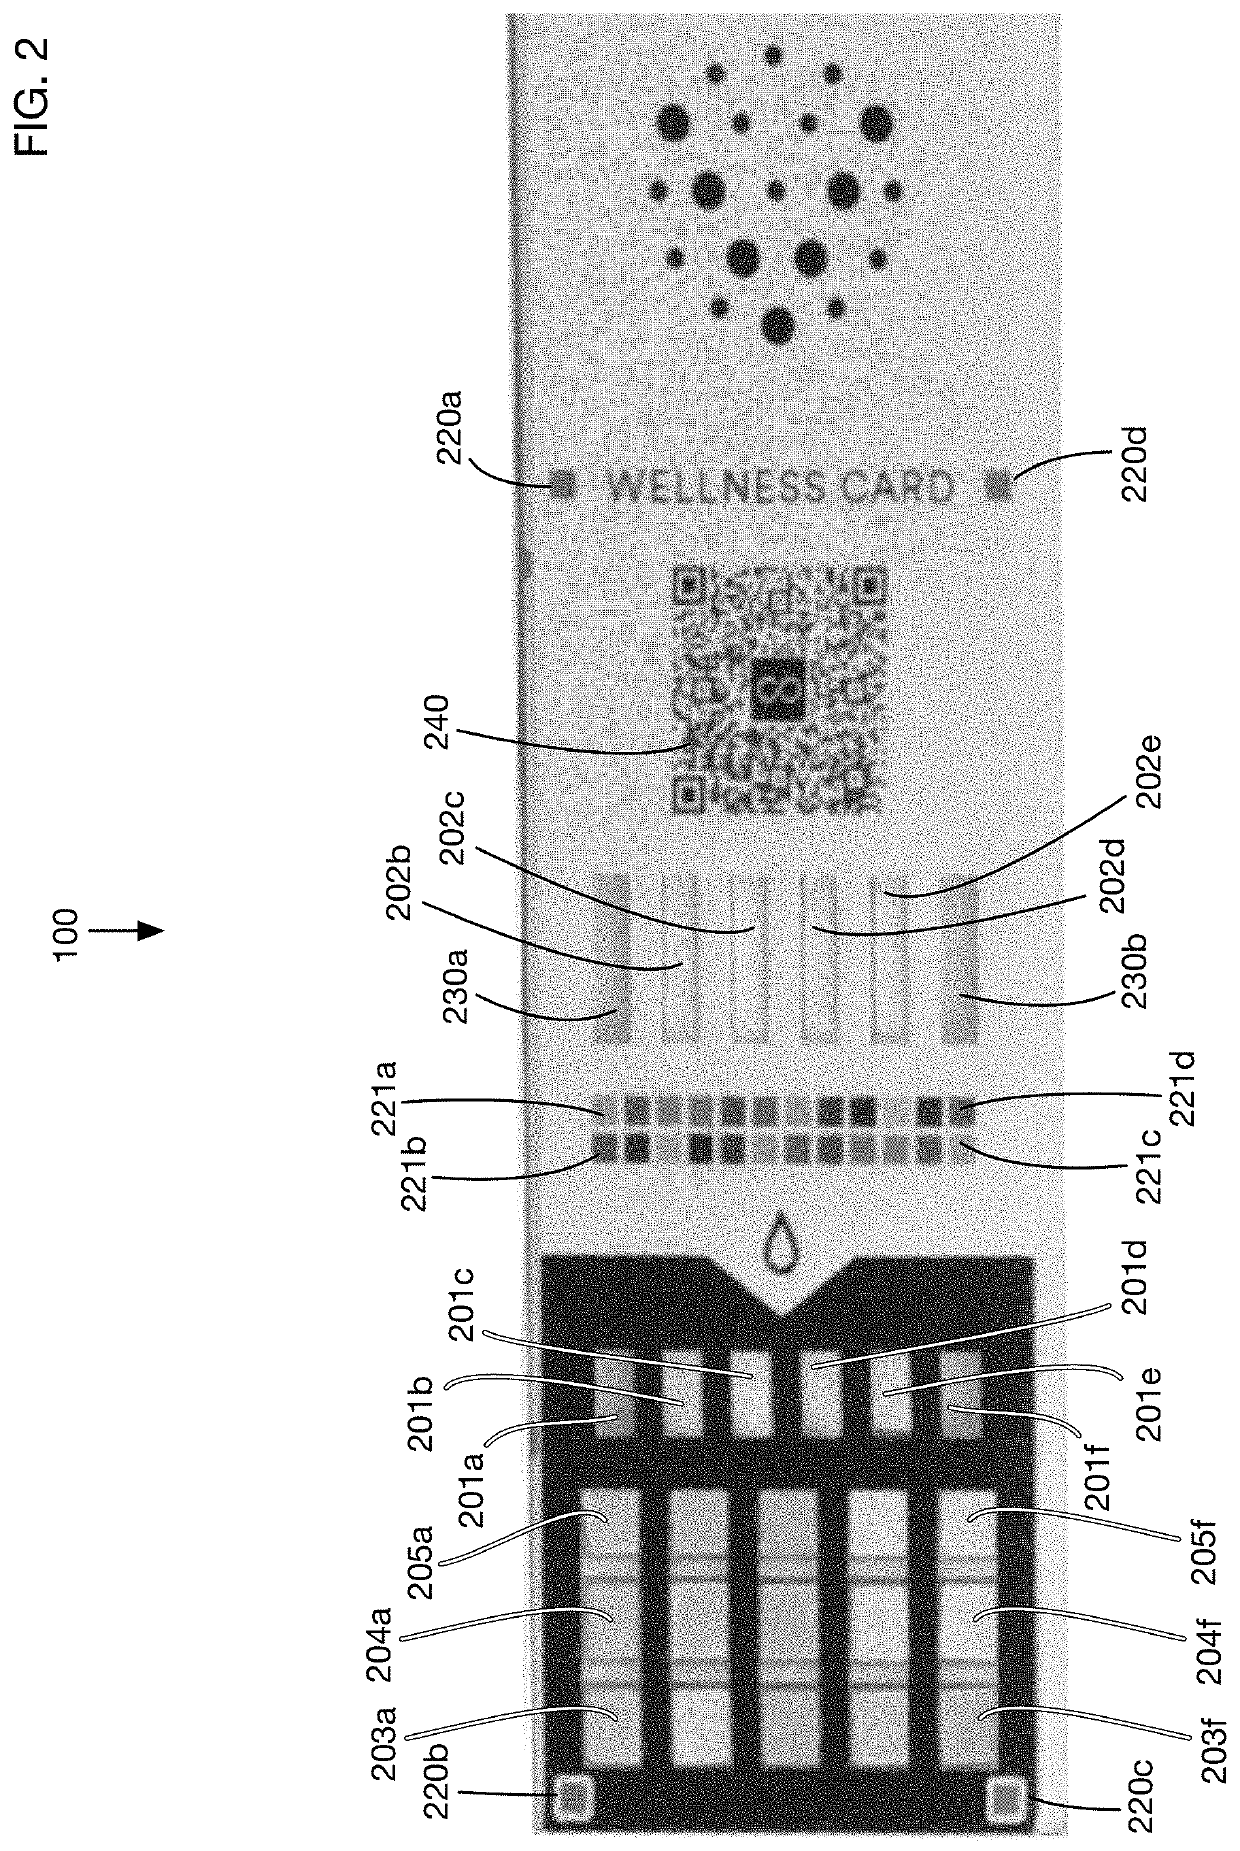 Multi-factor urine test system that adjusts for lighting and timing